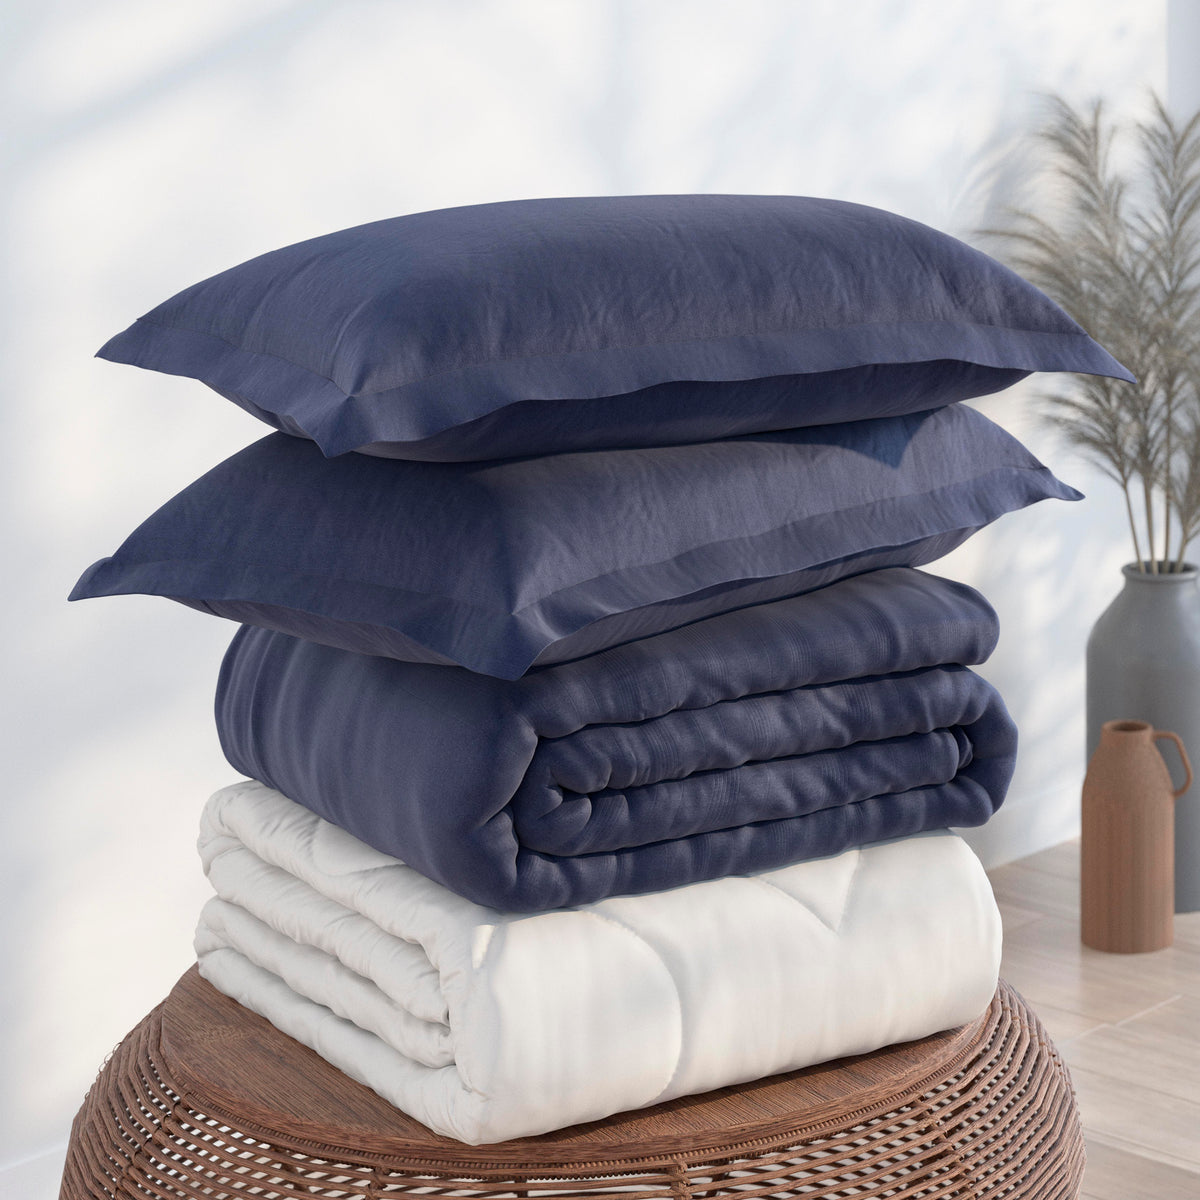 Image of the Midnight Soft Touch Bundle on top of a brown table. The bedding shown includes (from top to bottom): 2 Midnight Pillow Shams, a neatly folded Midnight Soft Touch Duvet Cover, and a neatly folded Soft Touch Duvet Insert 